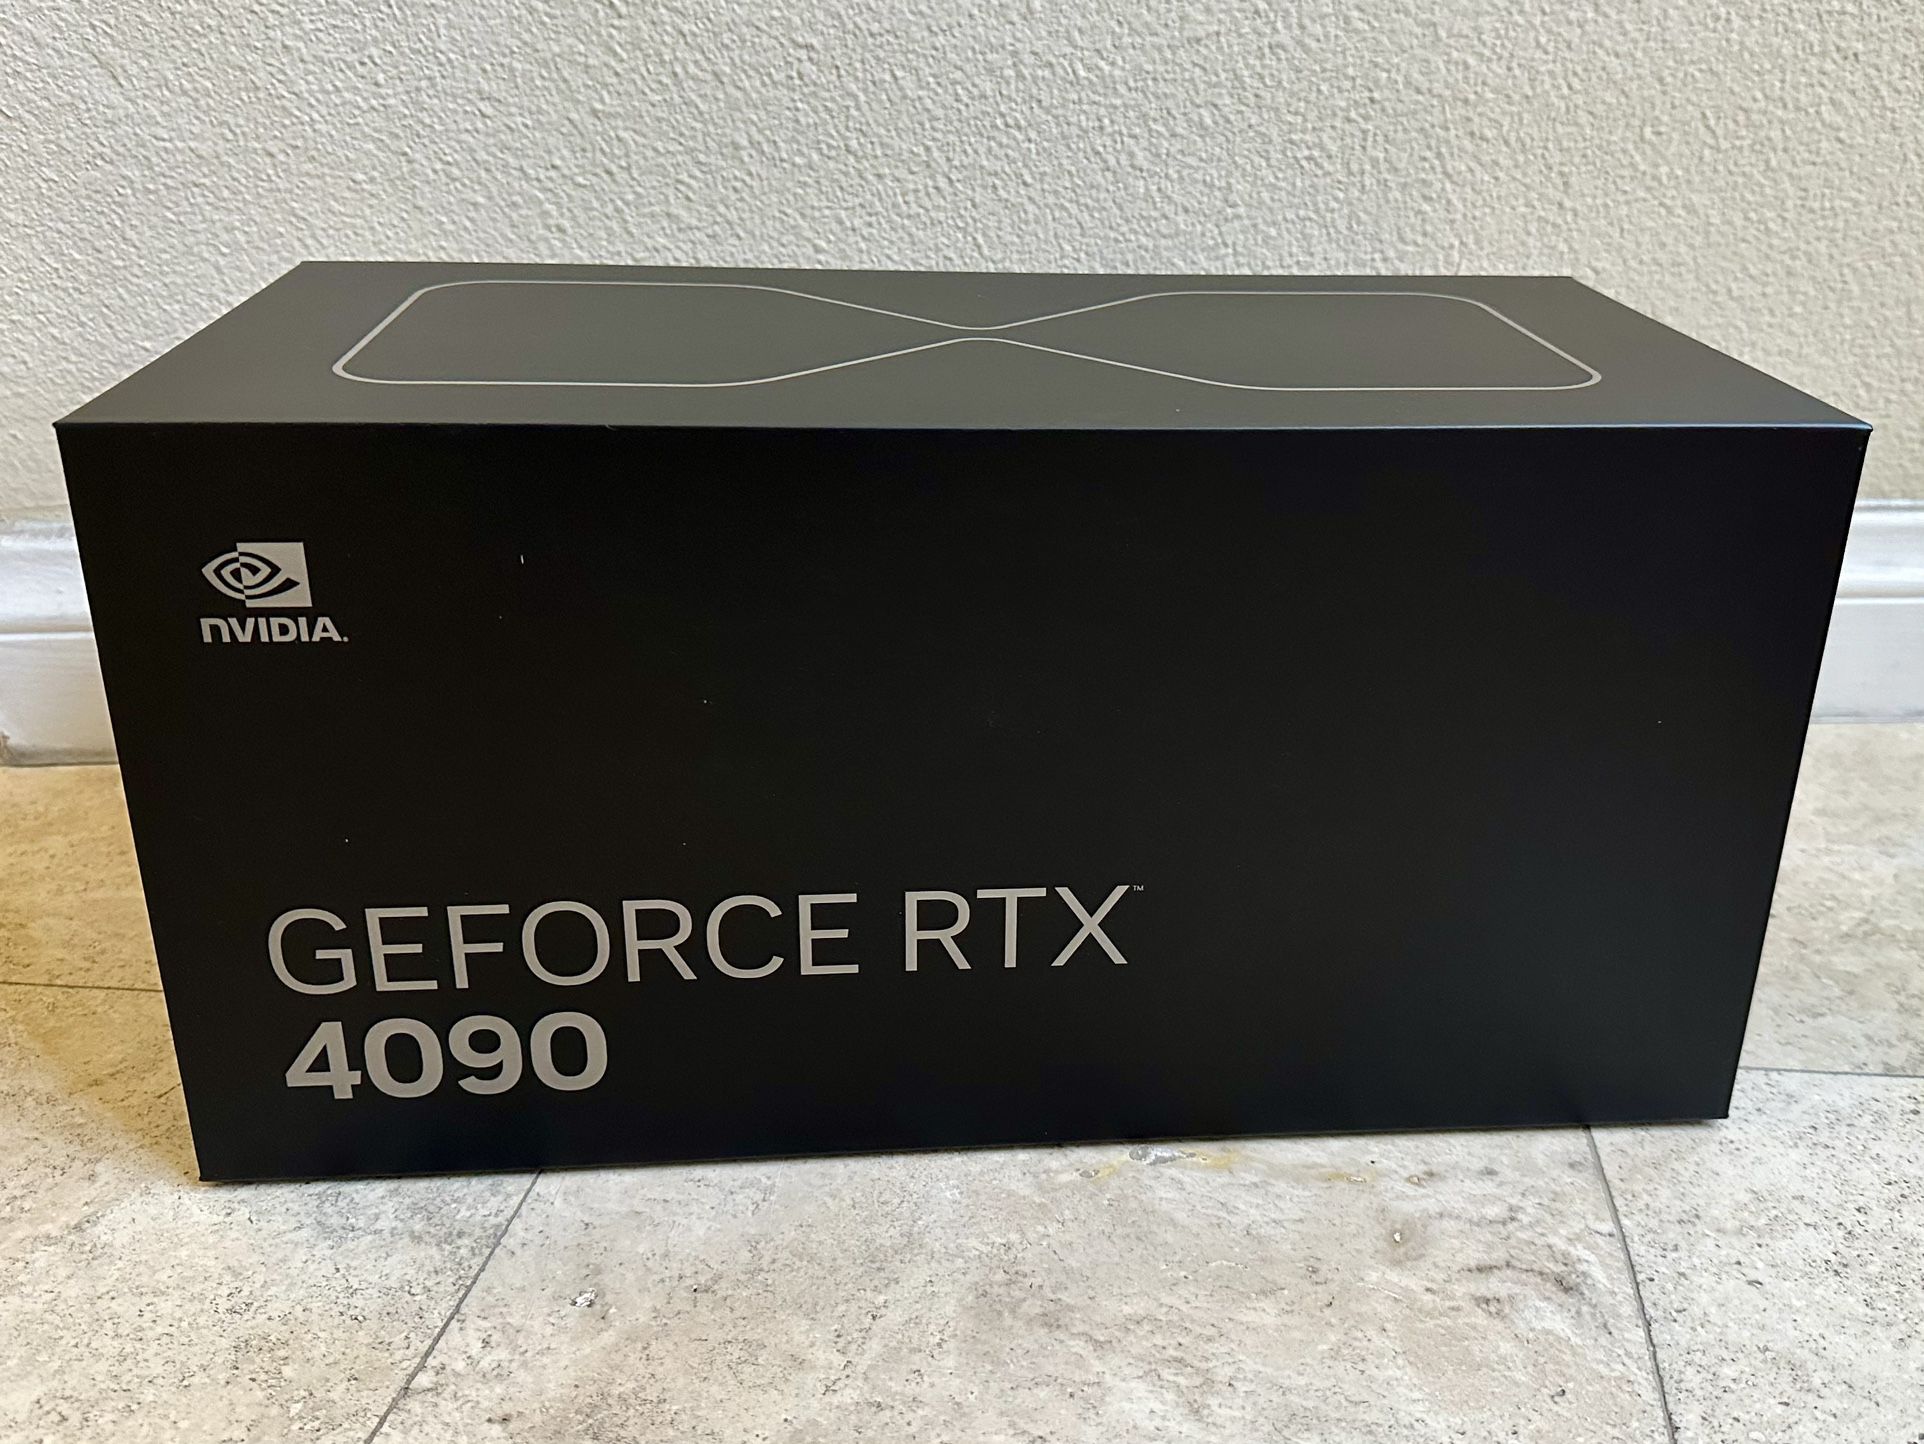 NVIDIA GEFORCE RTX 4090 FE Founders Edition graphics card, brand new, unopened, sealed